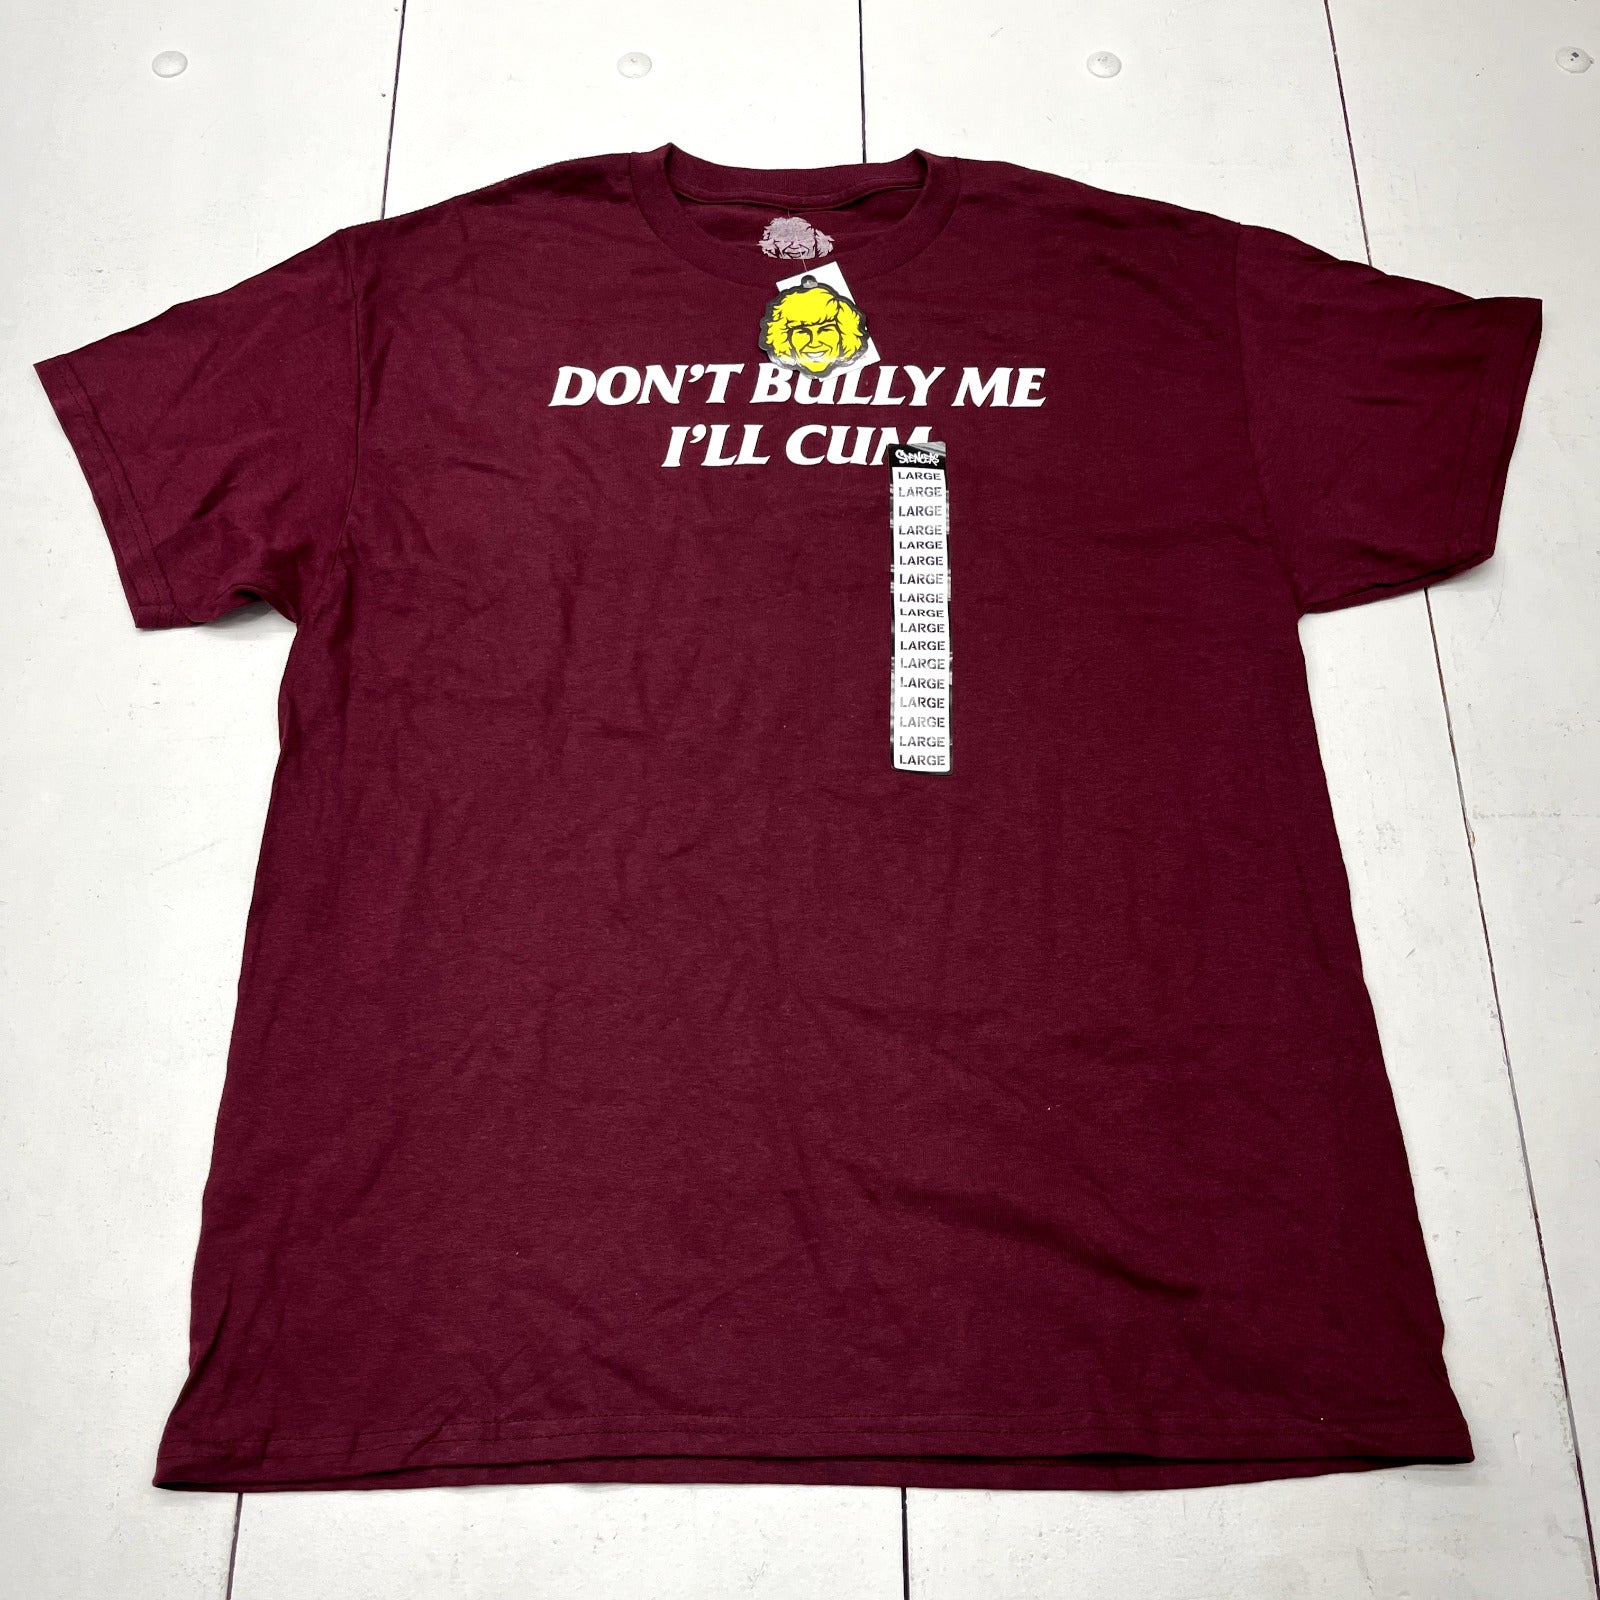 Danny Duncan Red "Don't Bully Me" Graphic Print T-Shirt Unisex Size Large